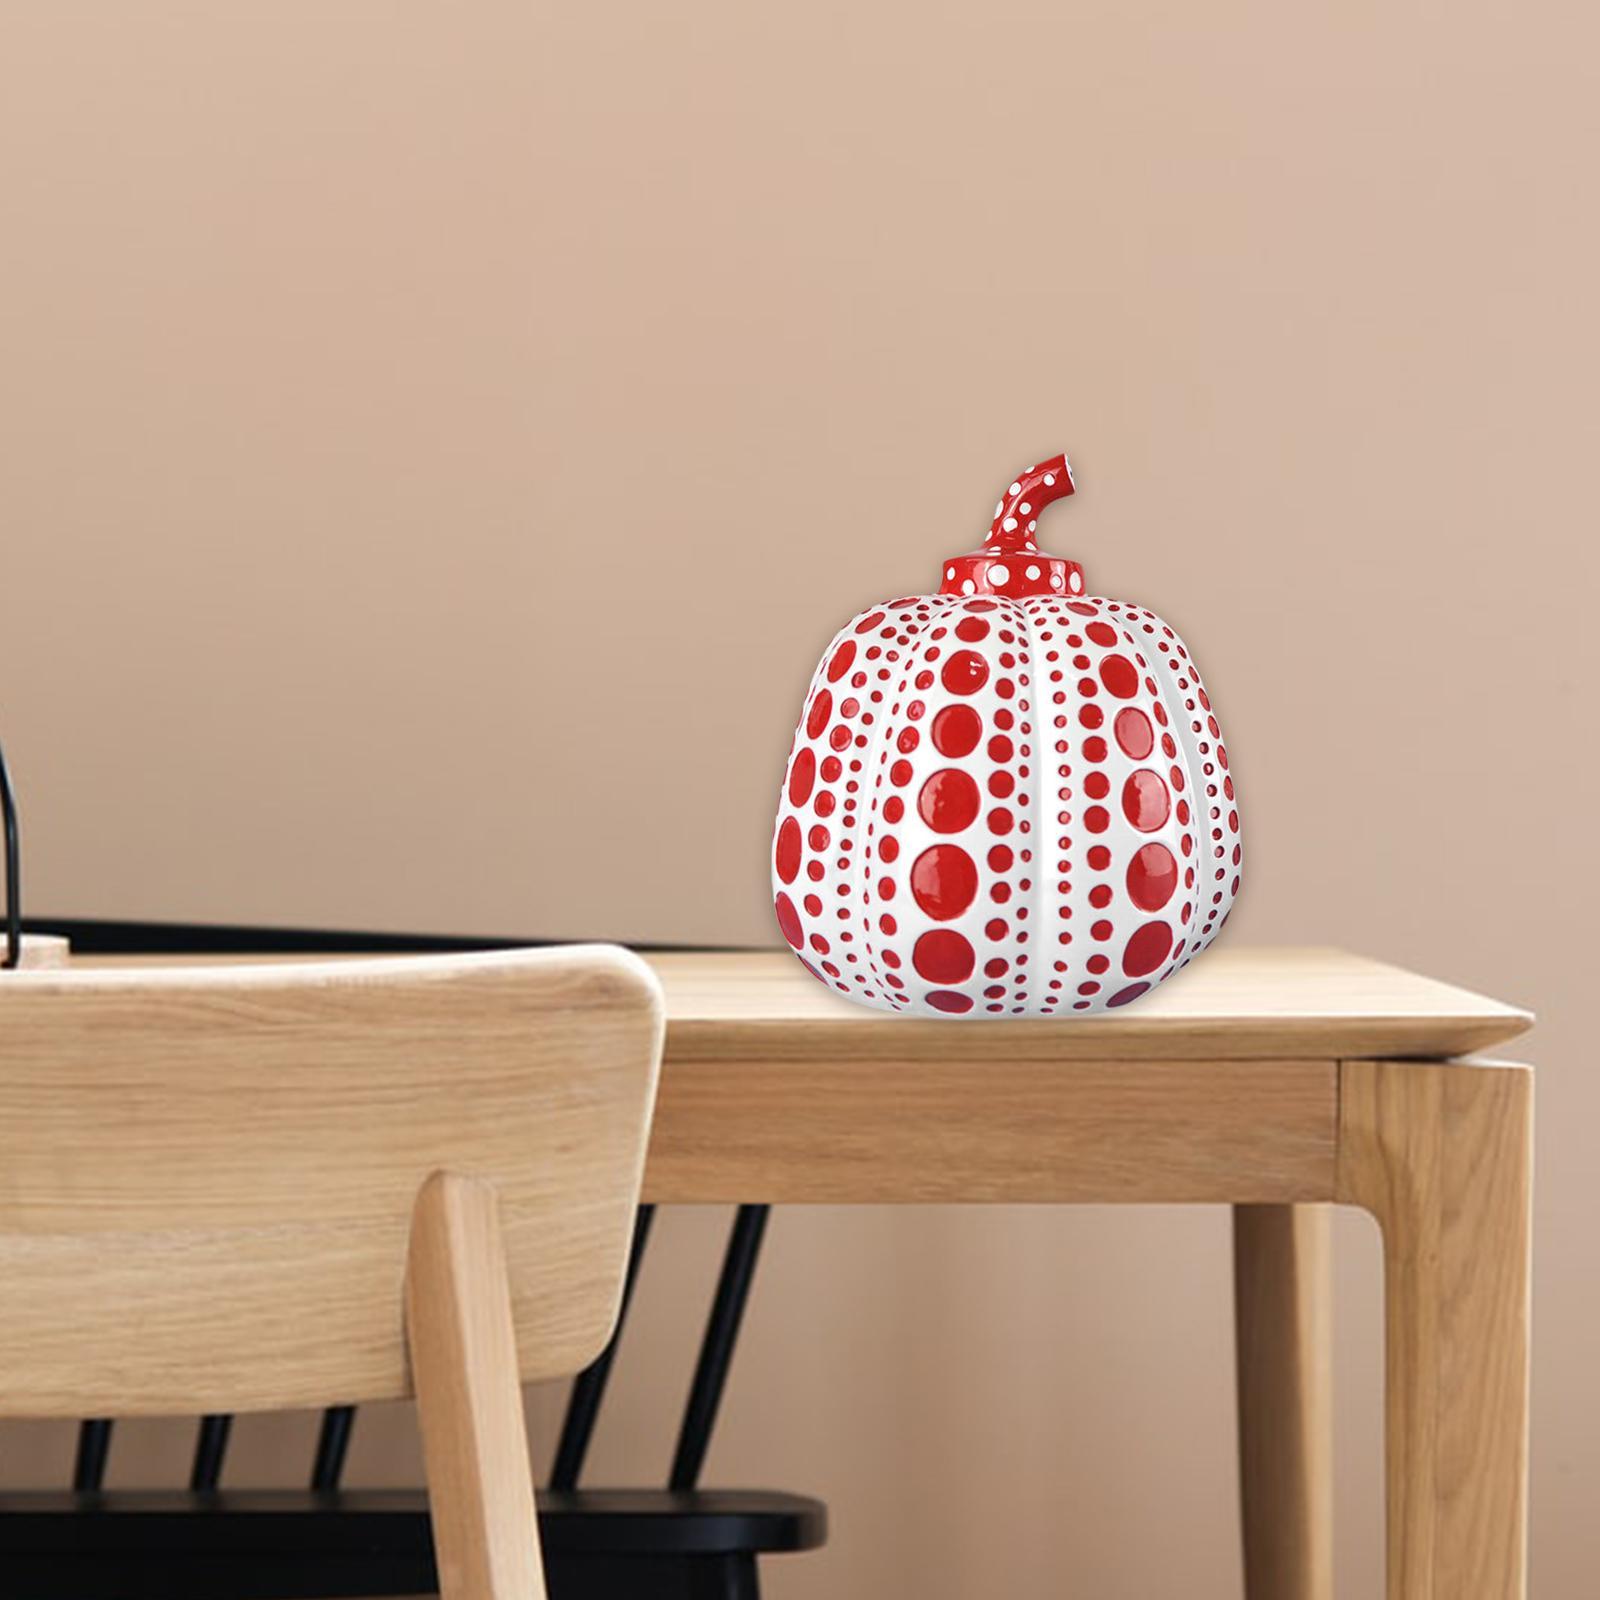 Modern Pumpkin Figures Vivid Statue Office Decor Accessory Ornament Gifts White Red